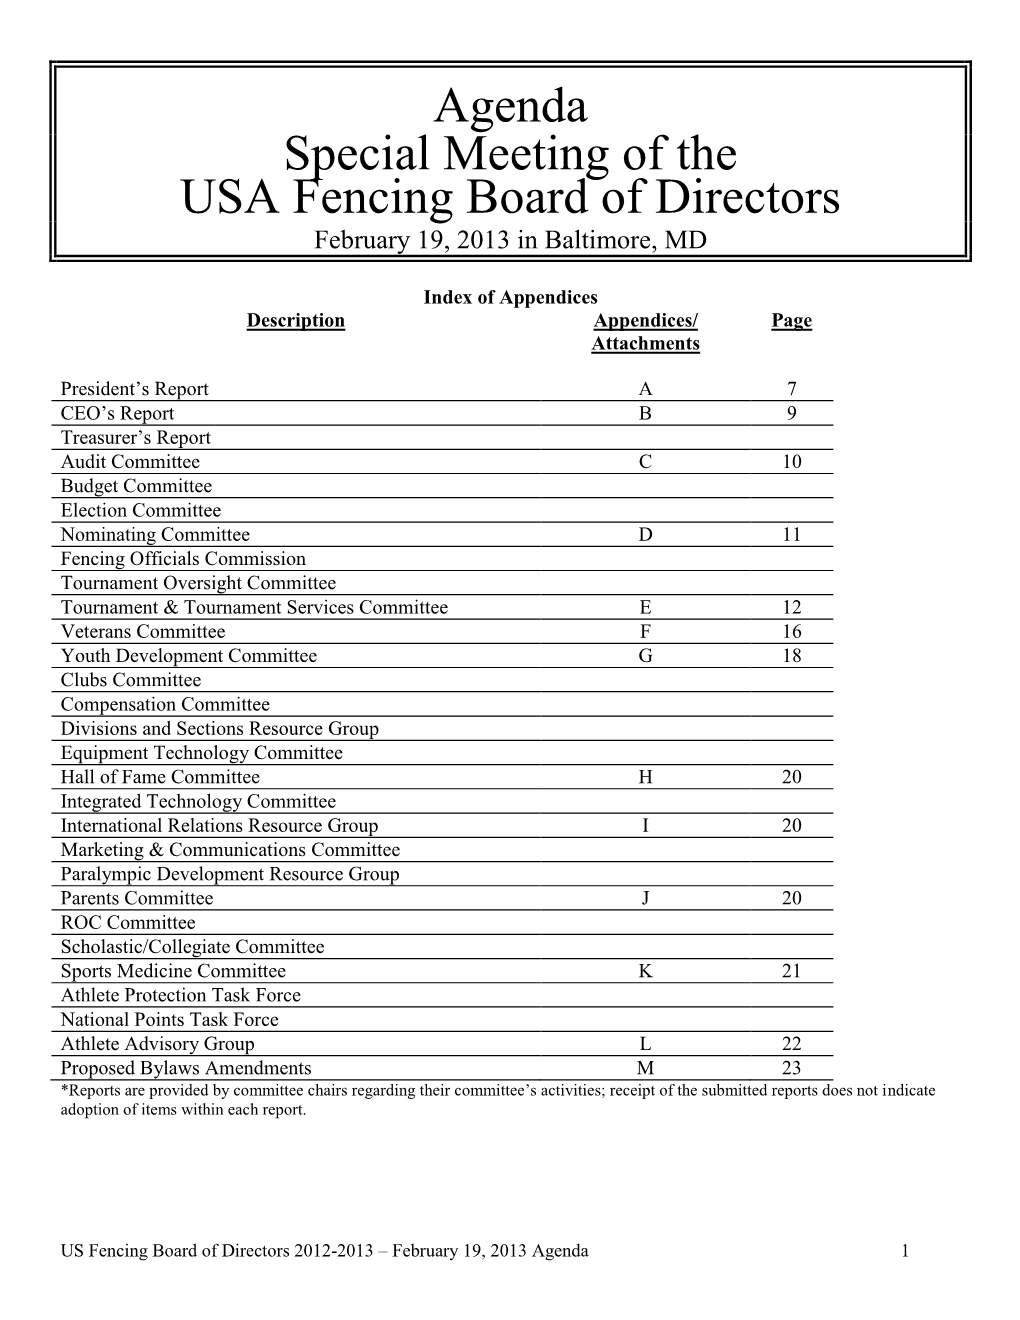 Agenda Special Meeting of the USA Fencing Board of Directors February 19, 2013 in Baltimore, MD